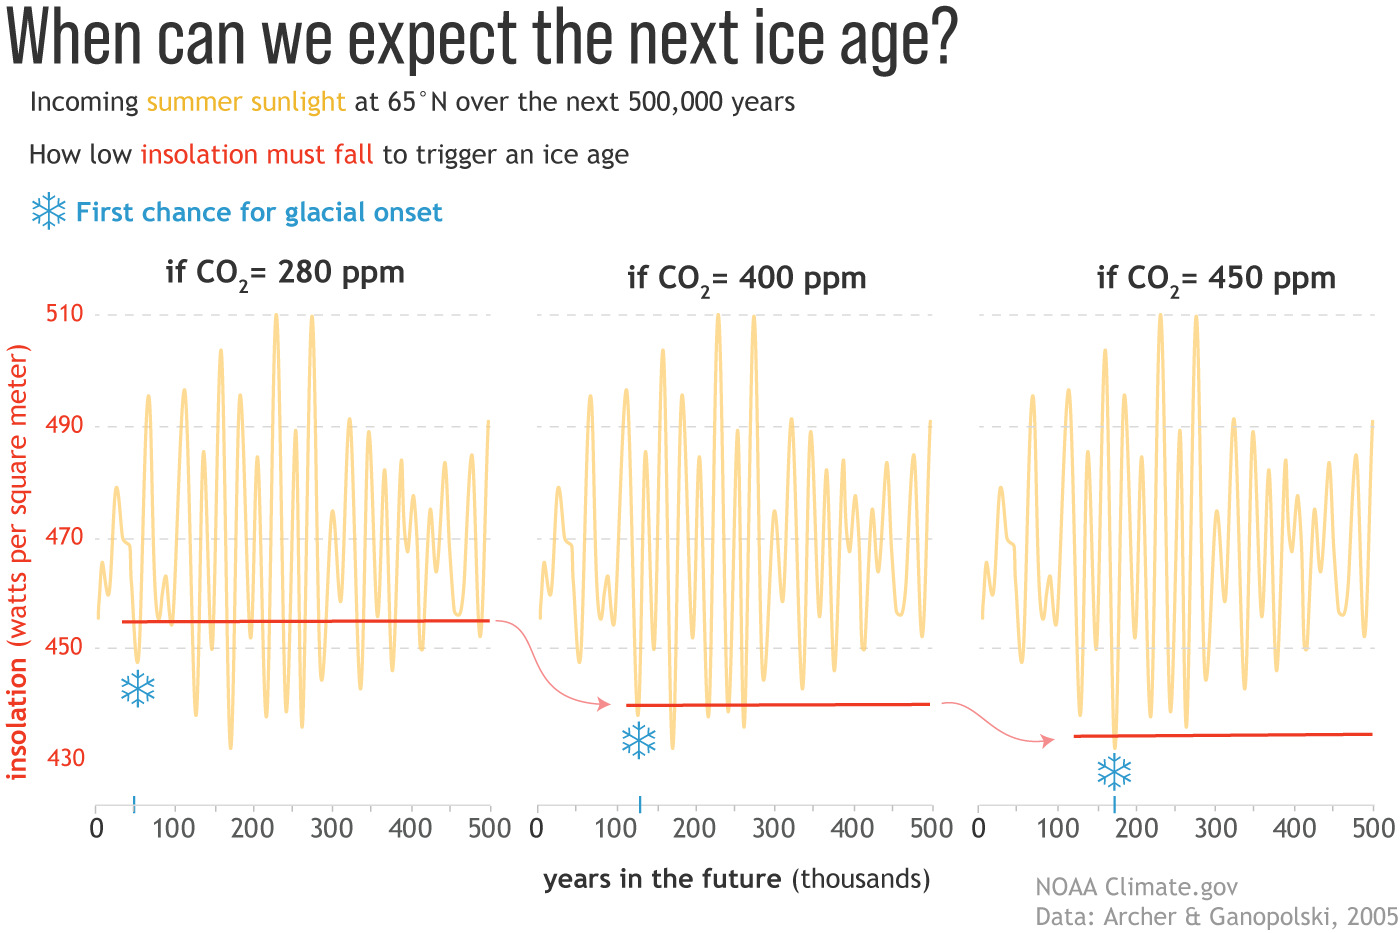 A trio of graphs showing how low incoming sunlight must fall at different atmospheric carbon dioxide levels in order to trigger an ice age<p>Yellow lines show changes in incoming sunlight in the Northern Hemisphere due to Milankovitch cycles over the next 500,000 years. (l<strong>eft panel</strong>) At pre-industrial levels carbon dioxide levels of around 280 parts per million (ppm), insolation must drop below about 455 watts/m<sup>2</sup> (red line) to trigger an ice age, a threshold that will be reached a